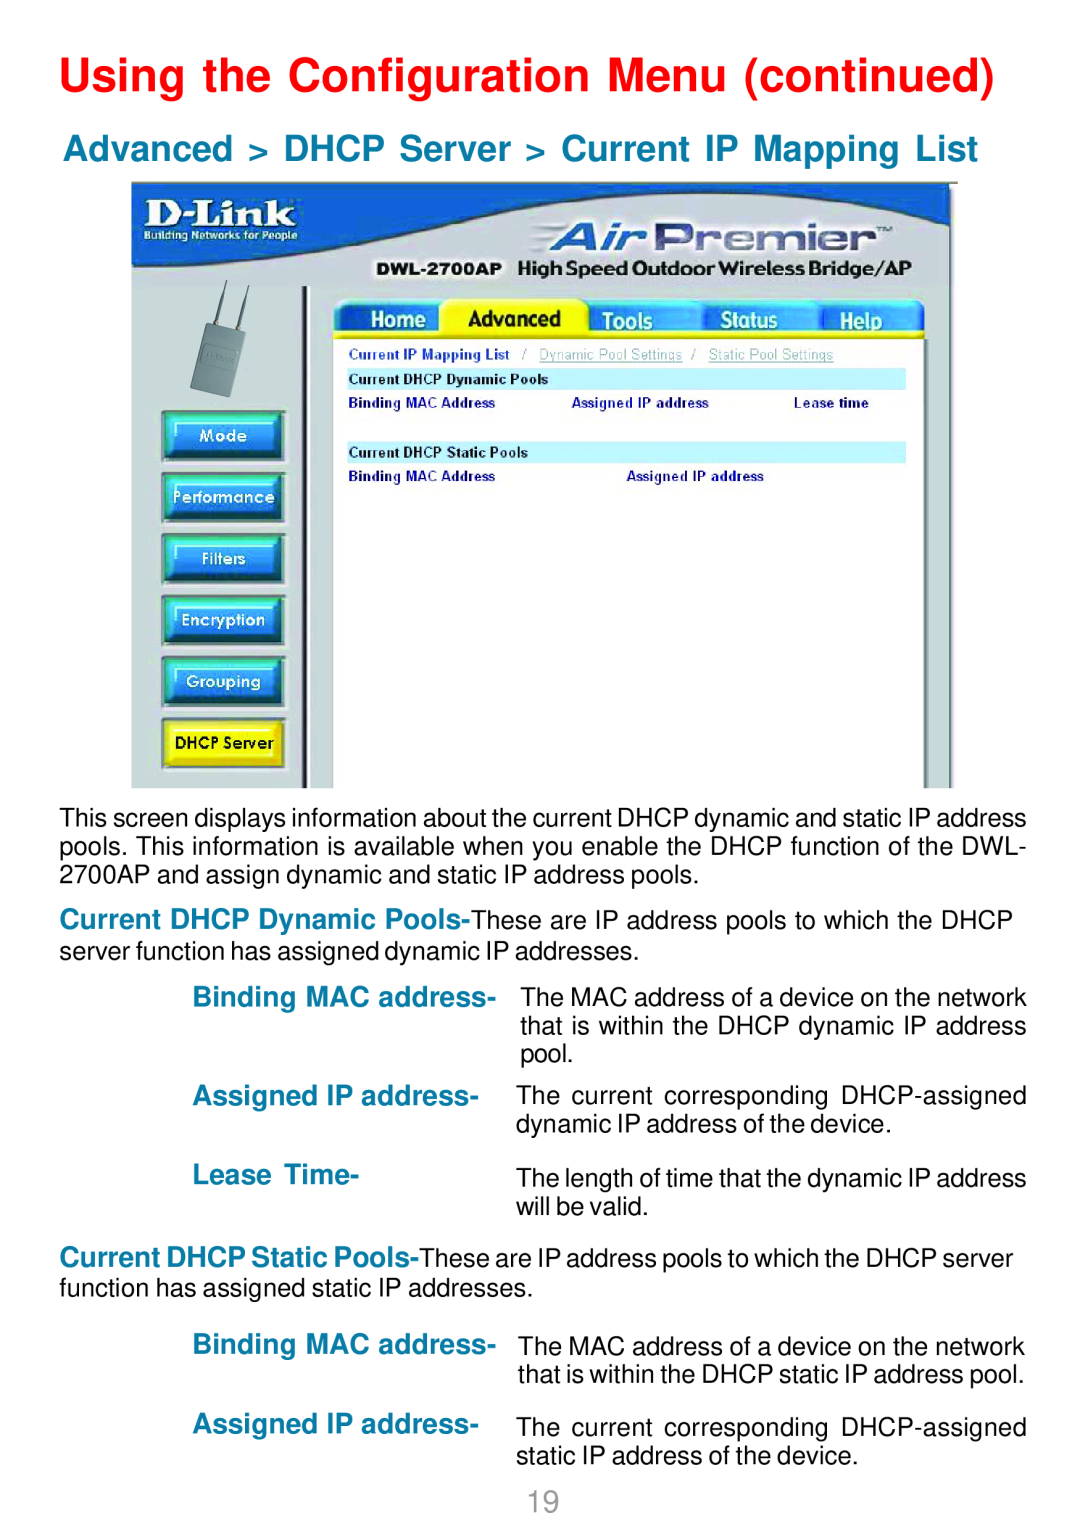 D-Link DWL-2700AP warranty Using the Configuration Menu continued, Advanced DHCP Server Current IP Mapping List 